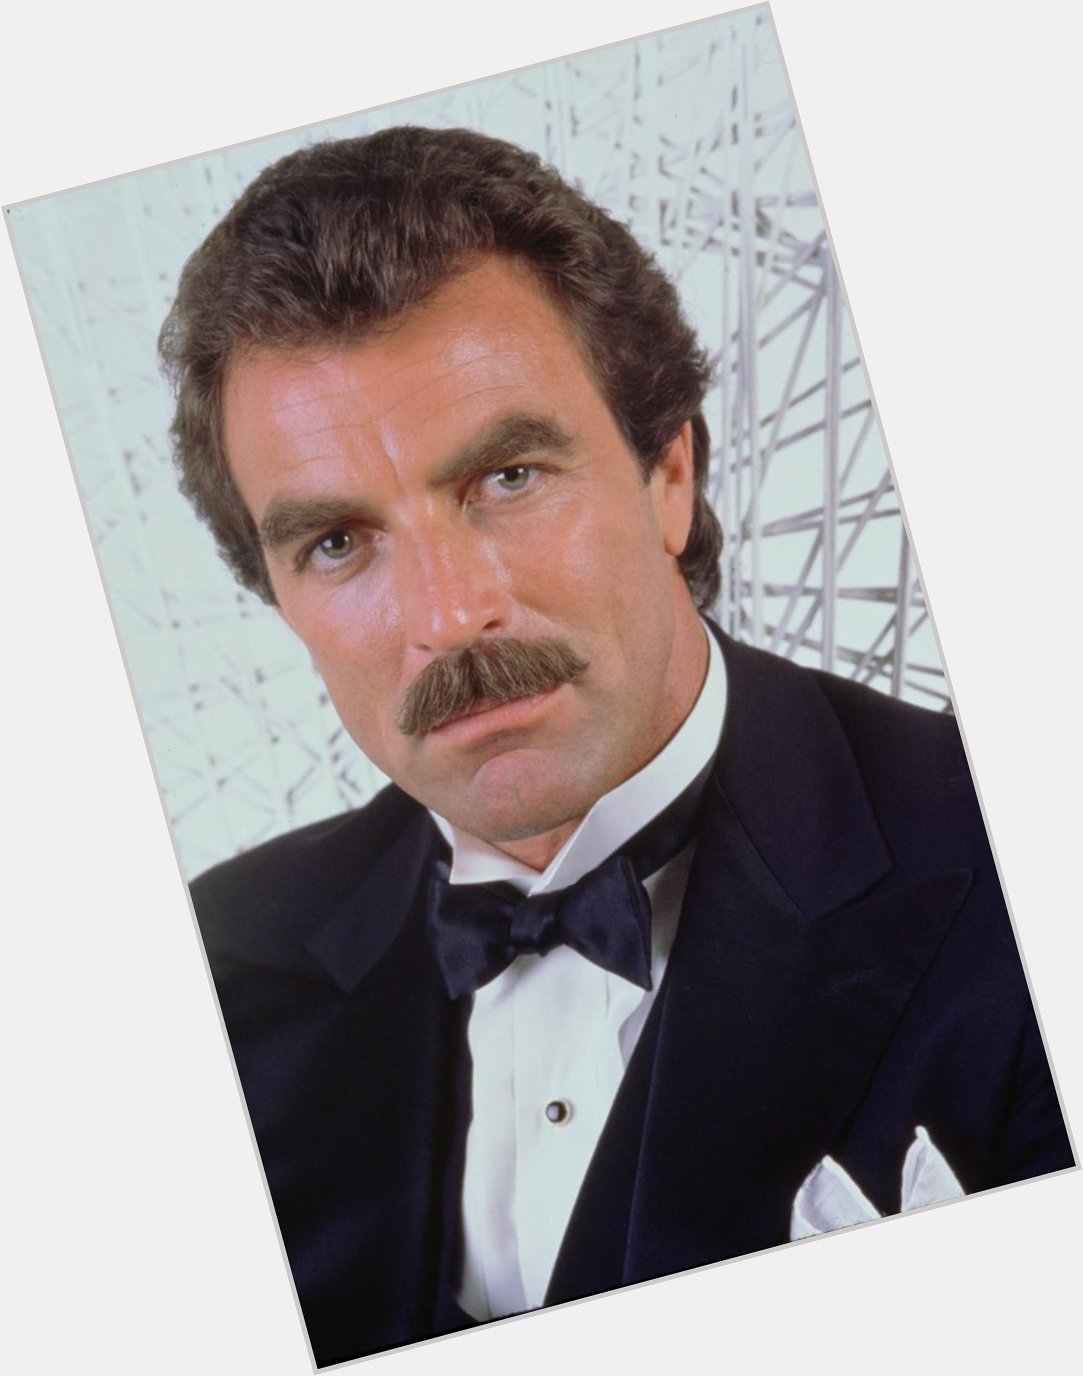 Happy Birthday to Tom Selleck, who turns 70 today! 